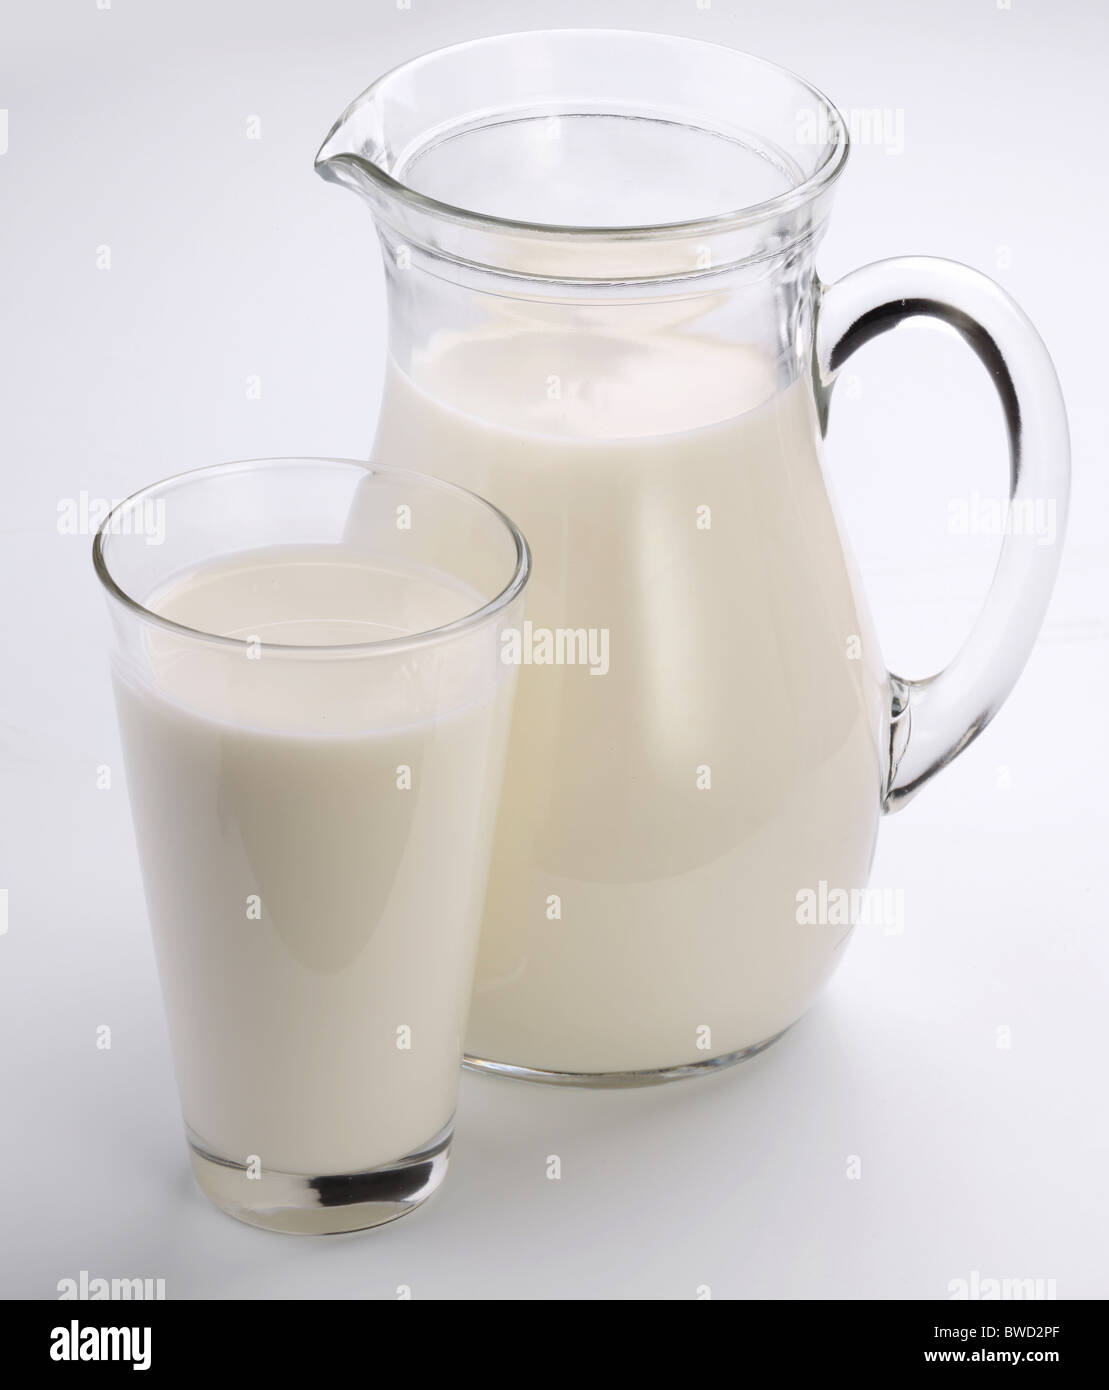 Glass and jar of milk on a white background. Stock Photo